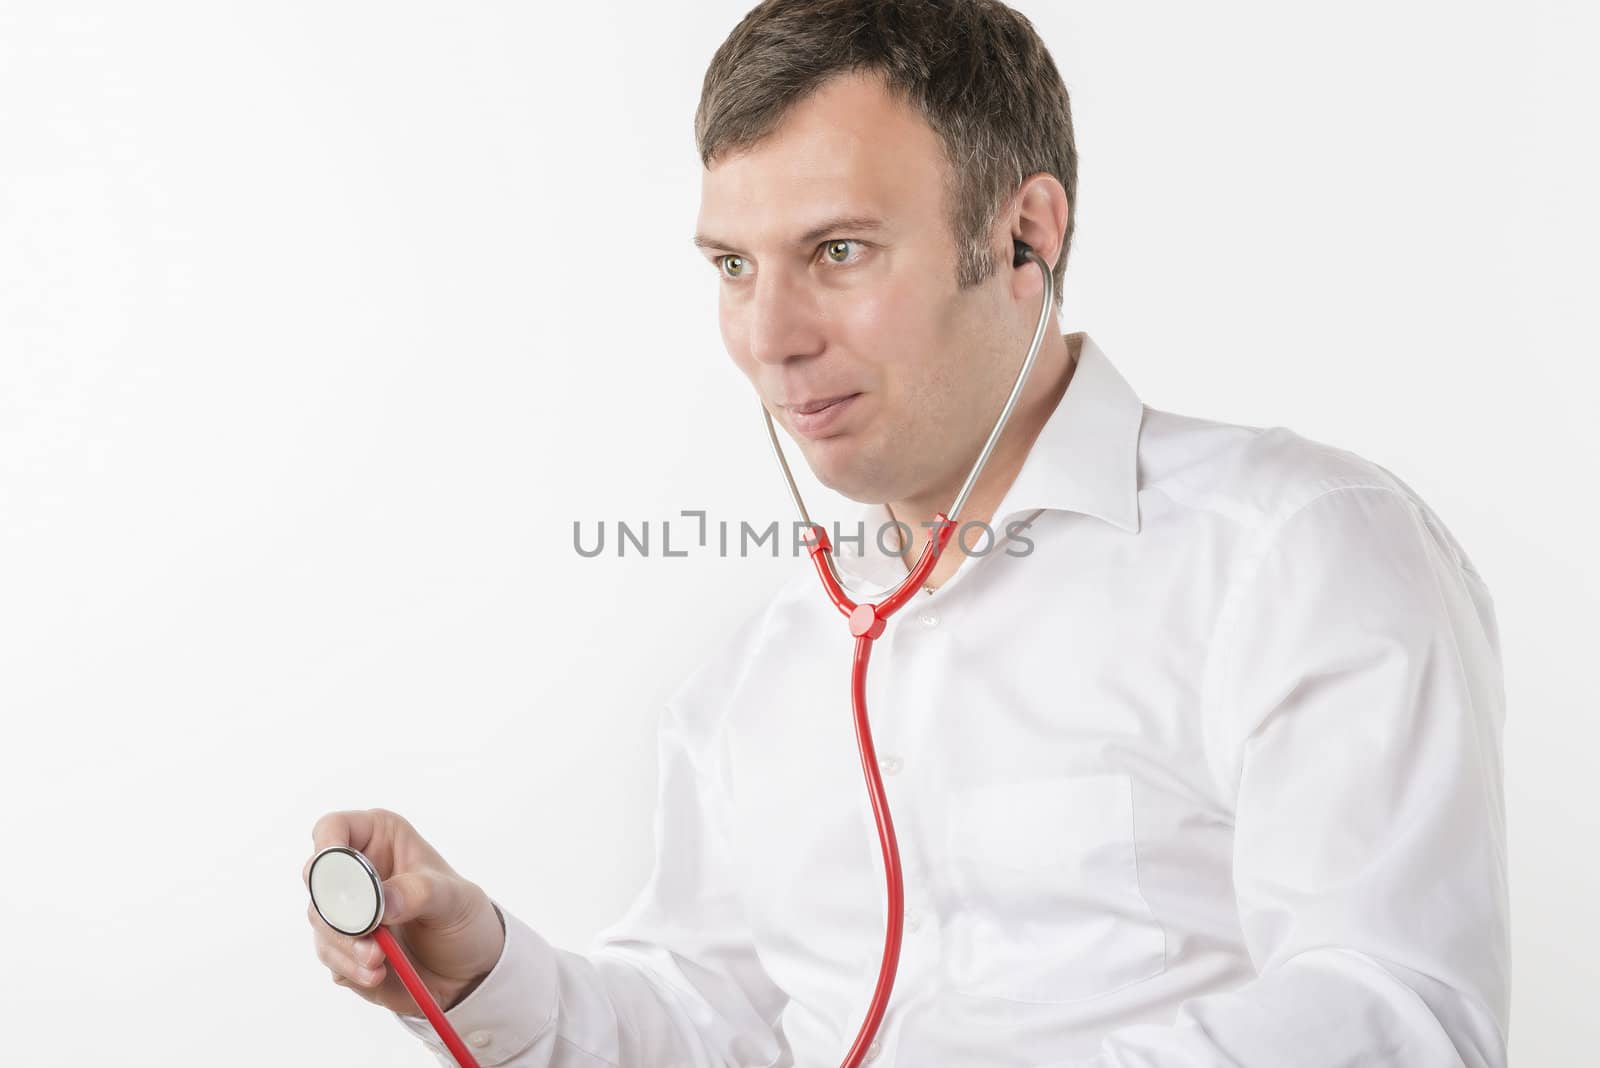 Man in white shirt is holding a red stetoscope on white background